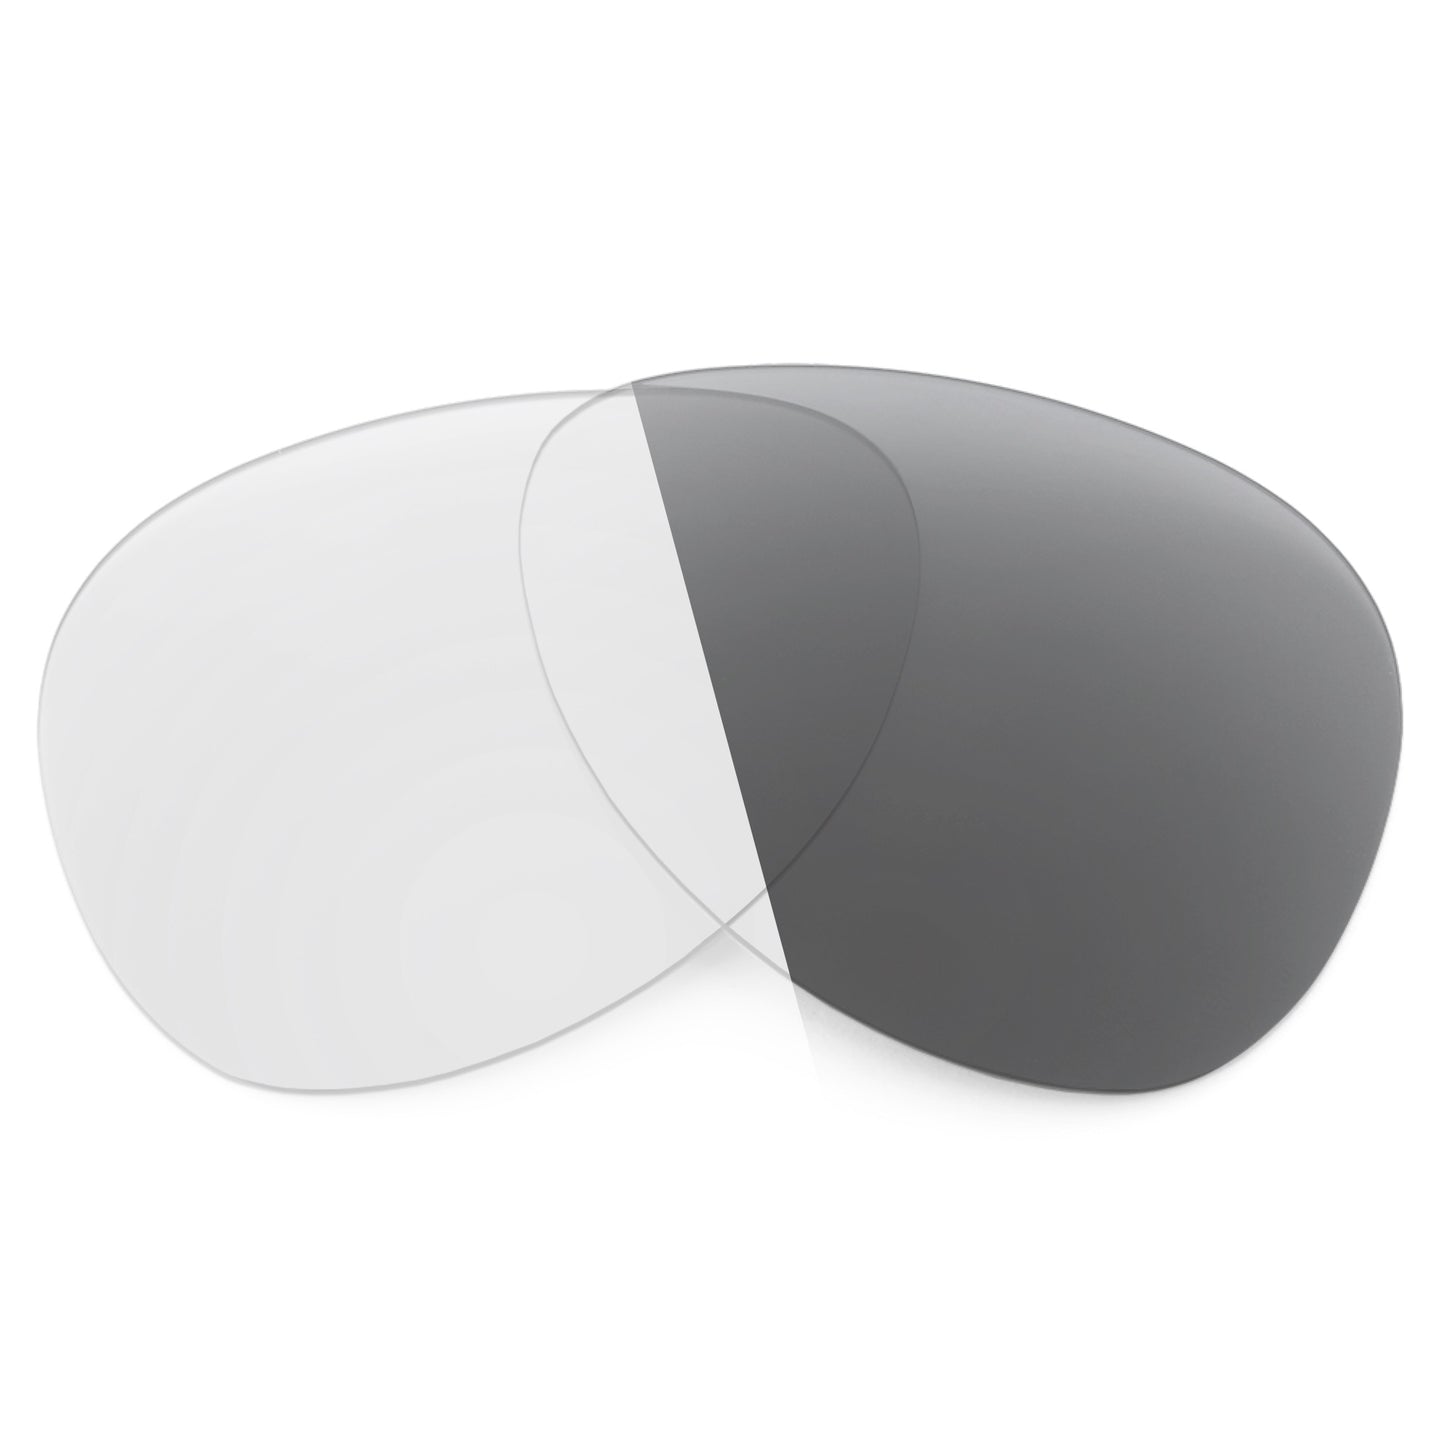 Revant replacement lenses for Ray-Ban RB3526 63mm Non-Polarized Adapt Gray Photochromic